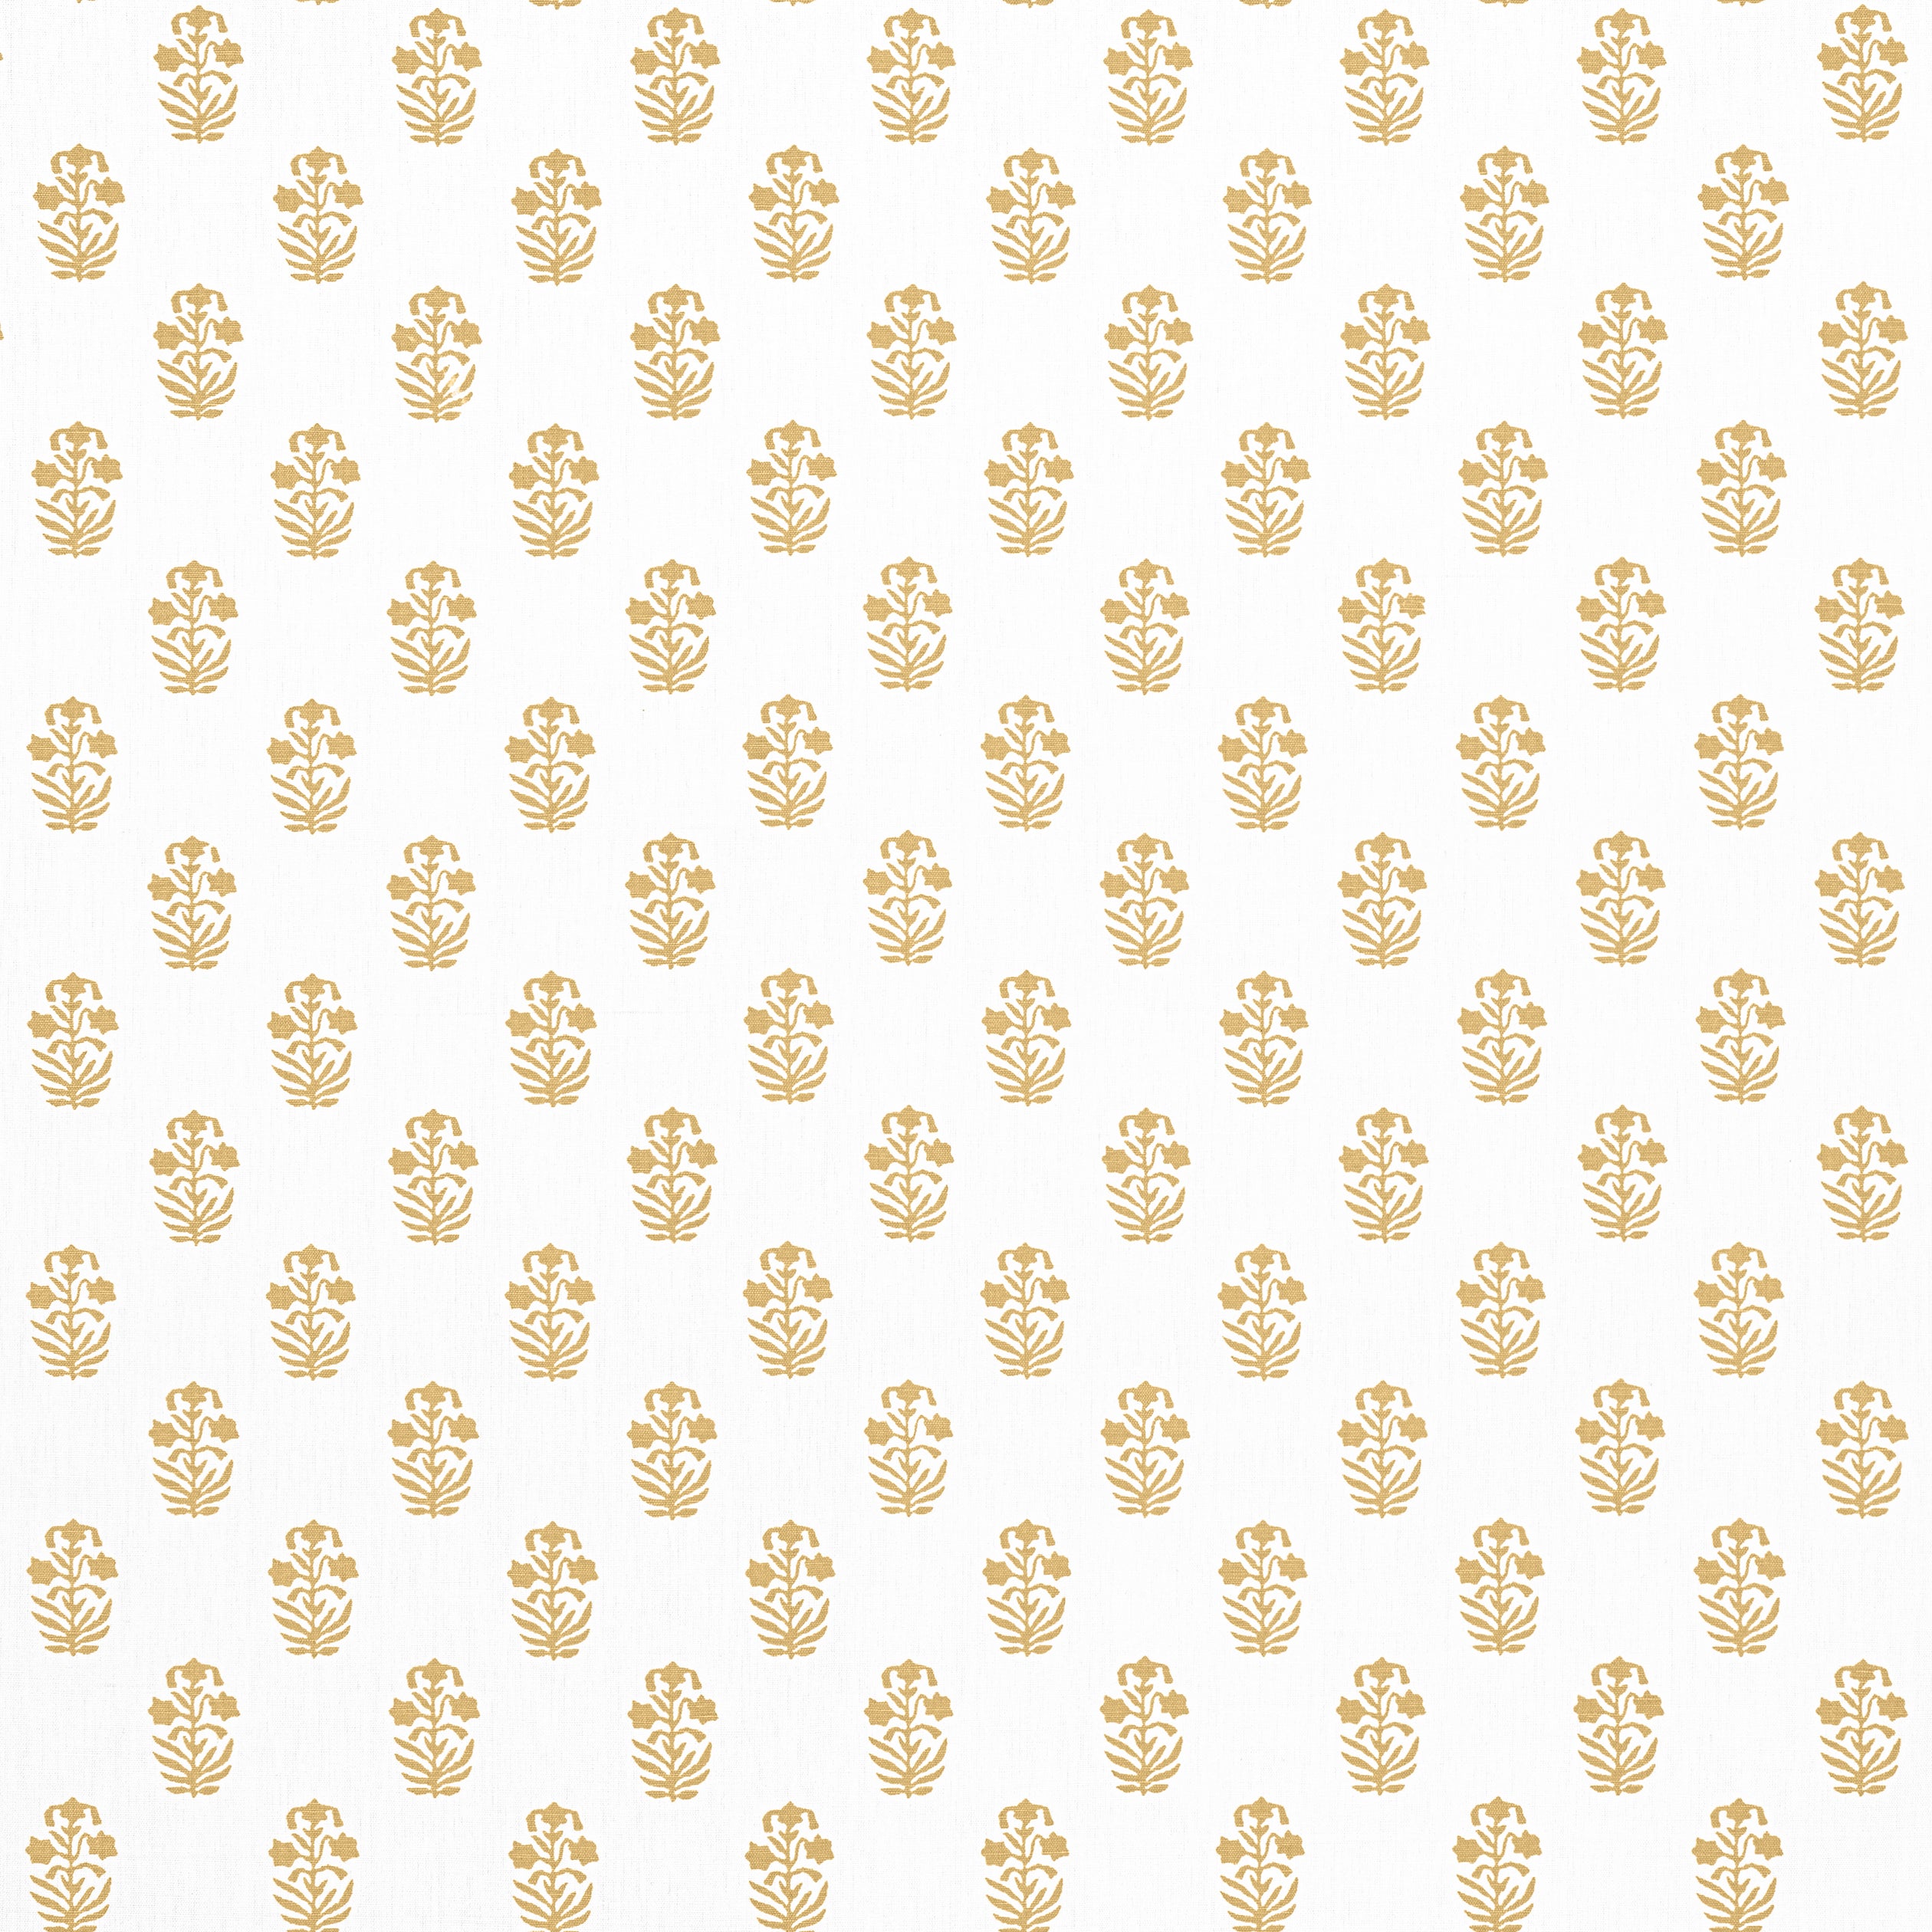 Corwin fabric in gold on white color - pattern number F936404 - by Thibaut in the Indienne collection